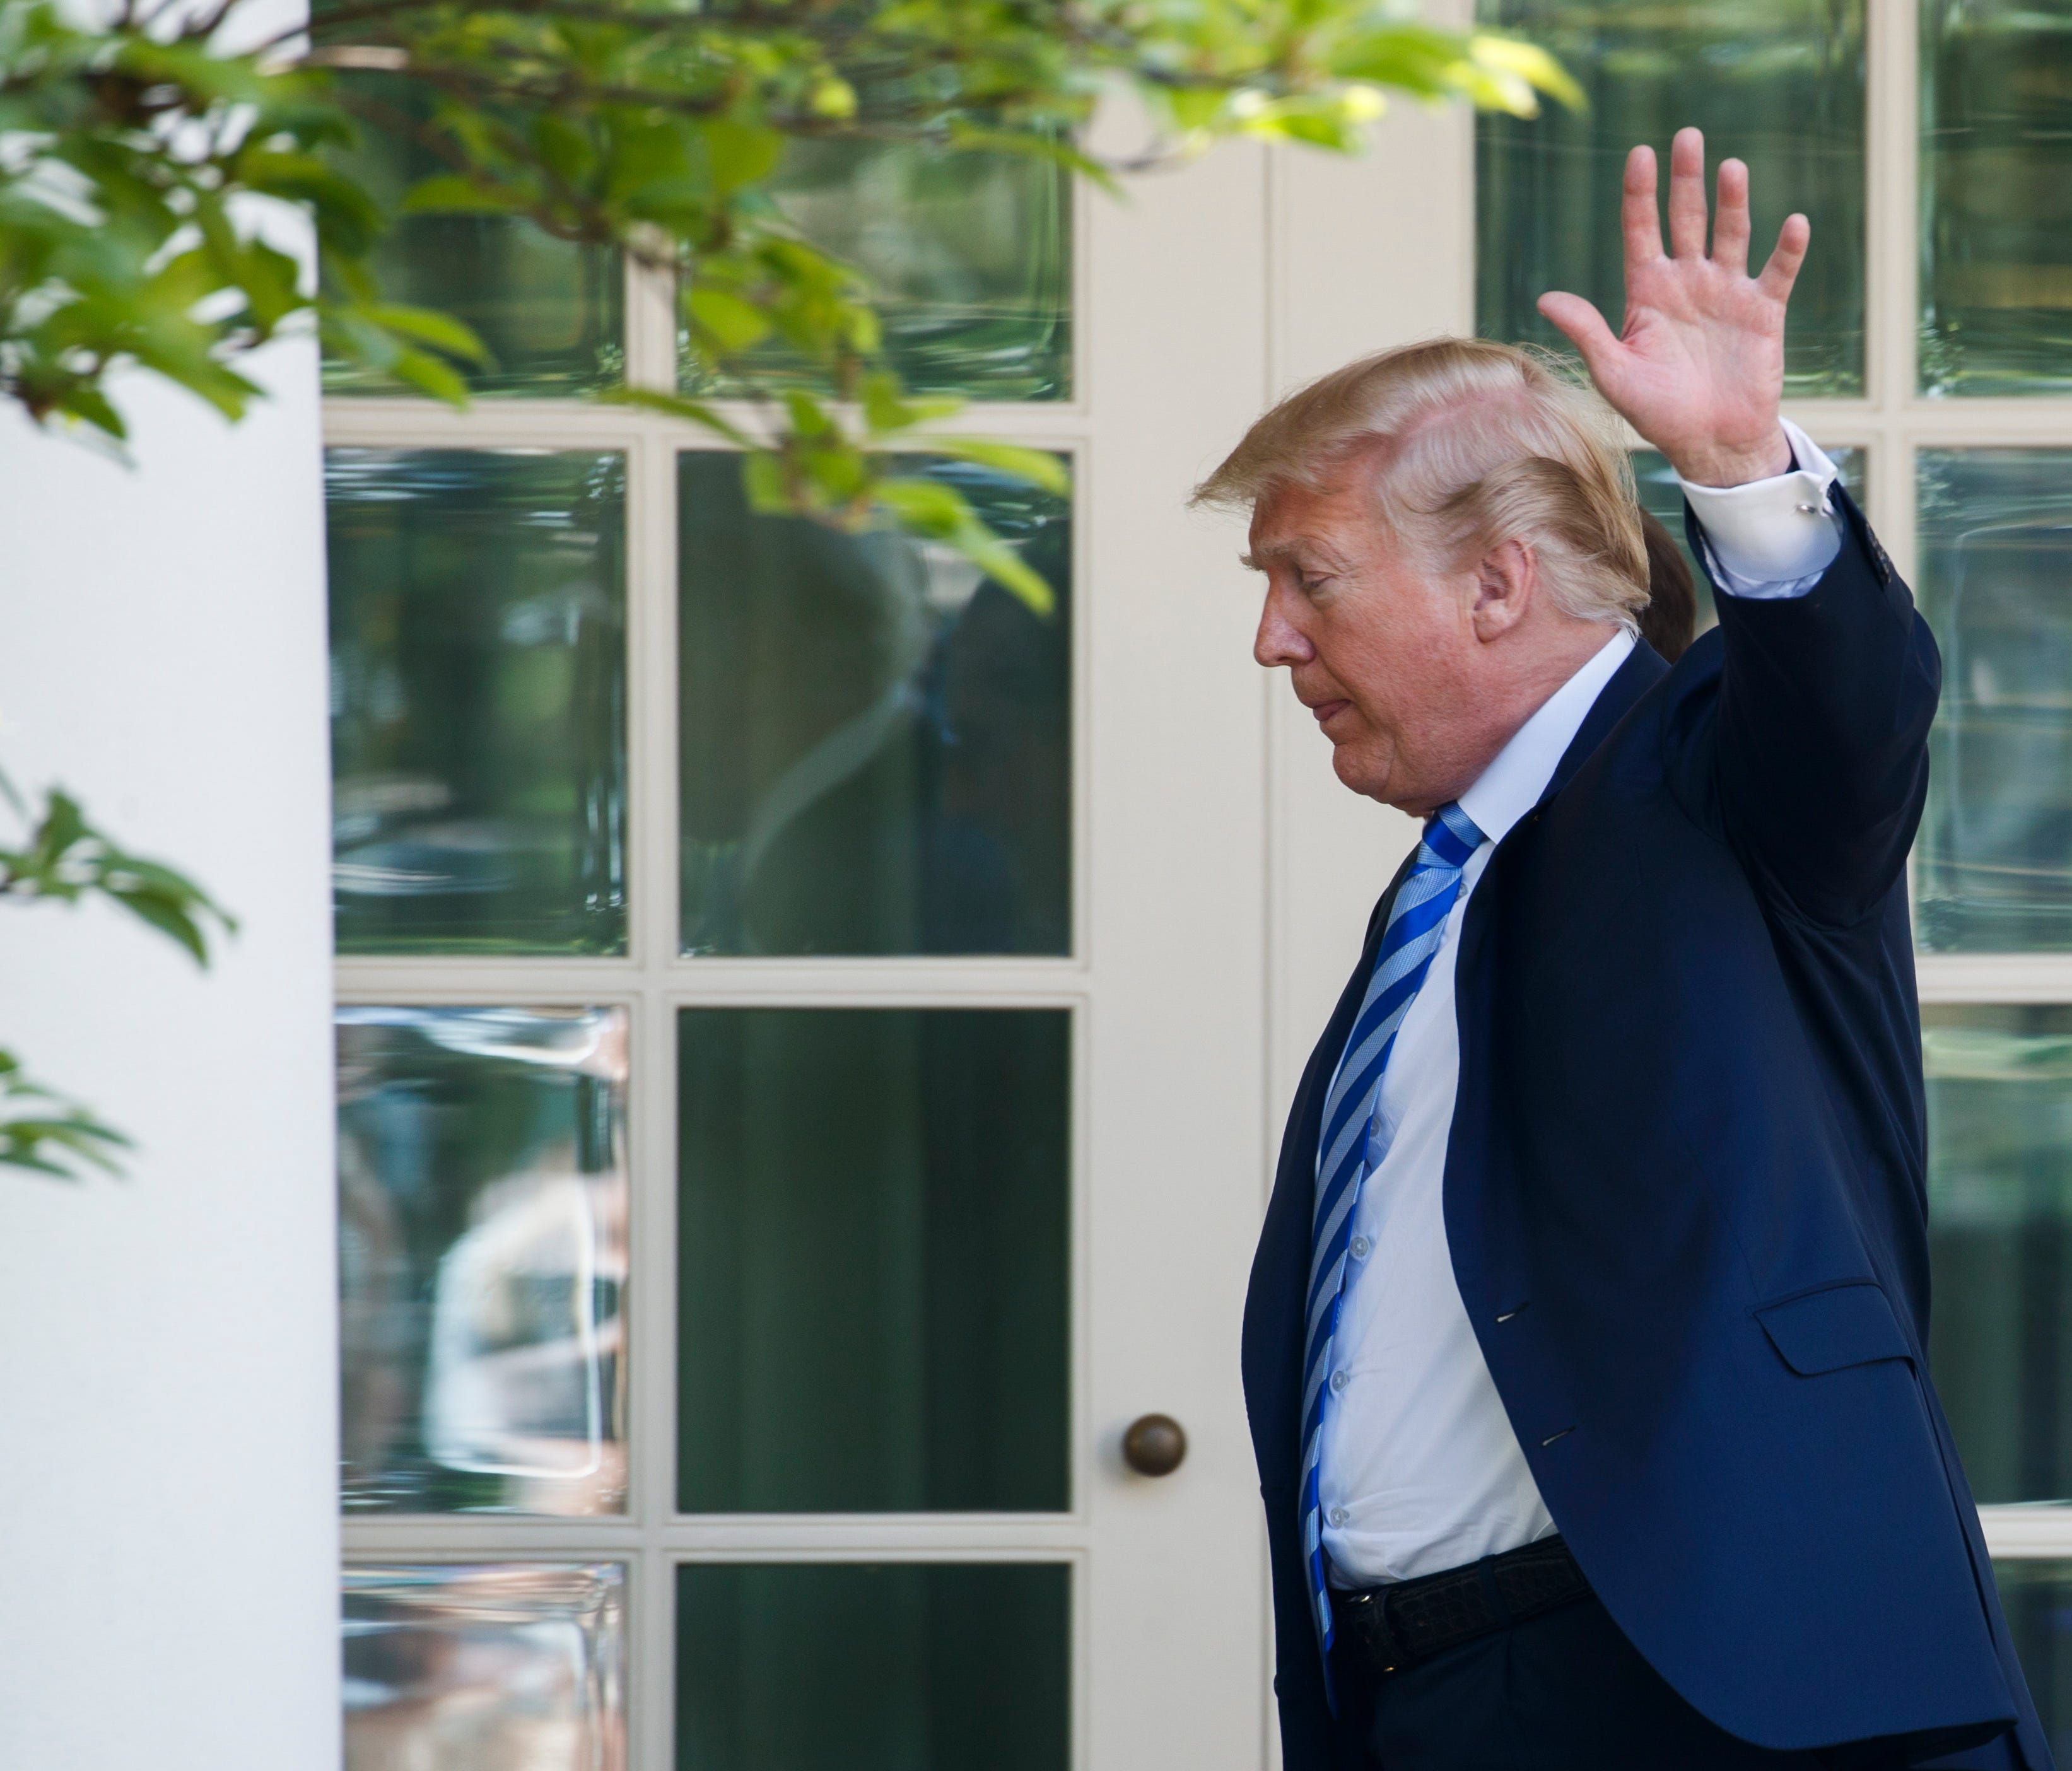 President Trump waves as he walks to the Oval Office after delivering remarks on lowering drug prices during an event in the Rose Garden of the White House Friday.